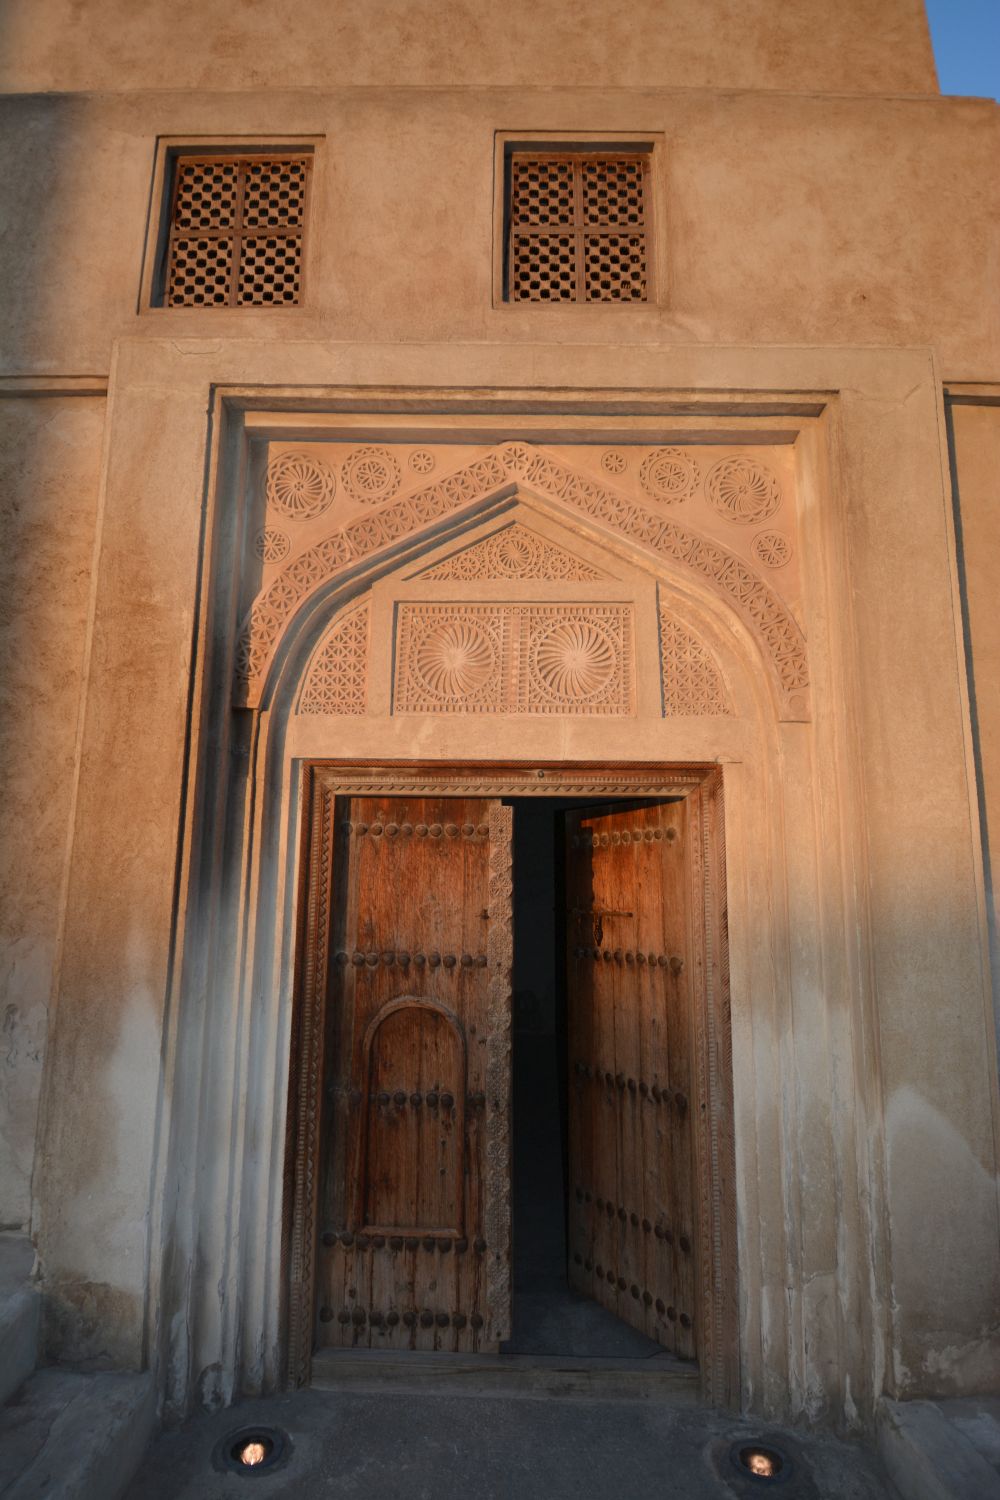 Detail of a doorway with carved ornamentation on the exterior of a building in Muharraq.